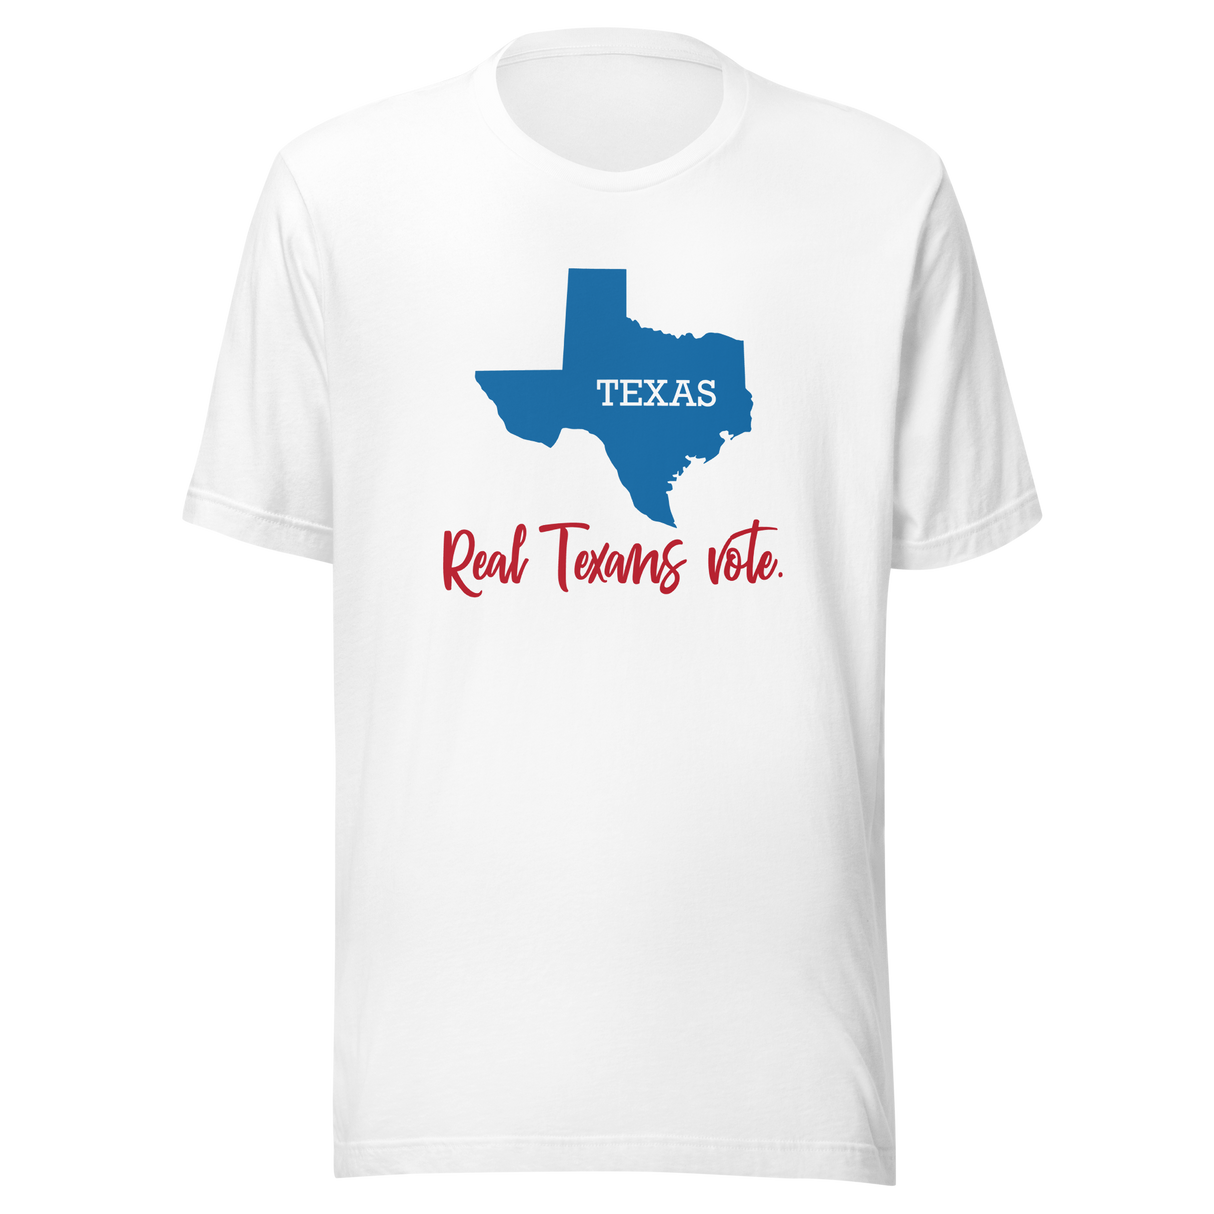 real-texans-vote-texas-tee-vote-t-shirt-real-texans-tee-vote-t-shirt-election-tee#color_white